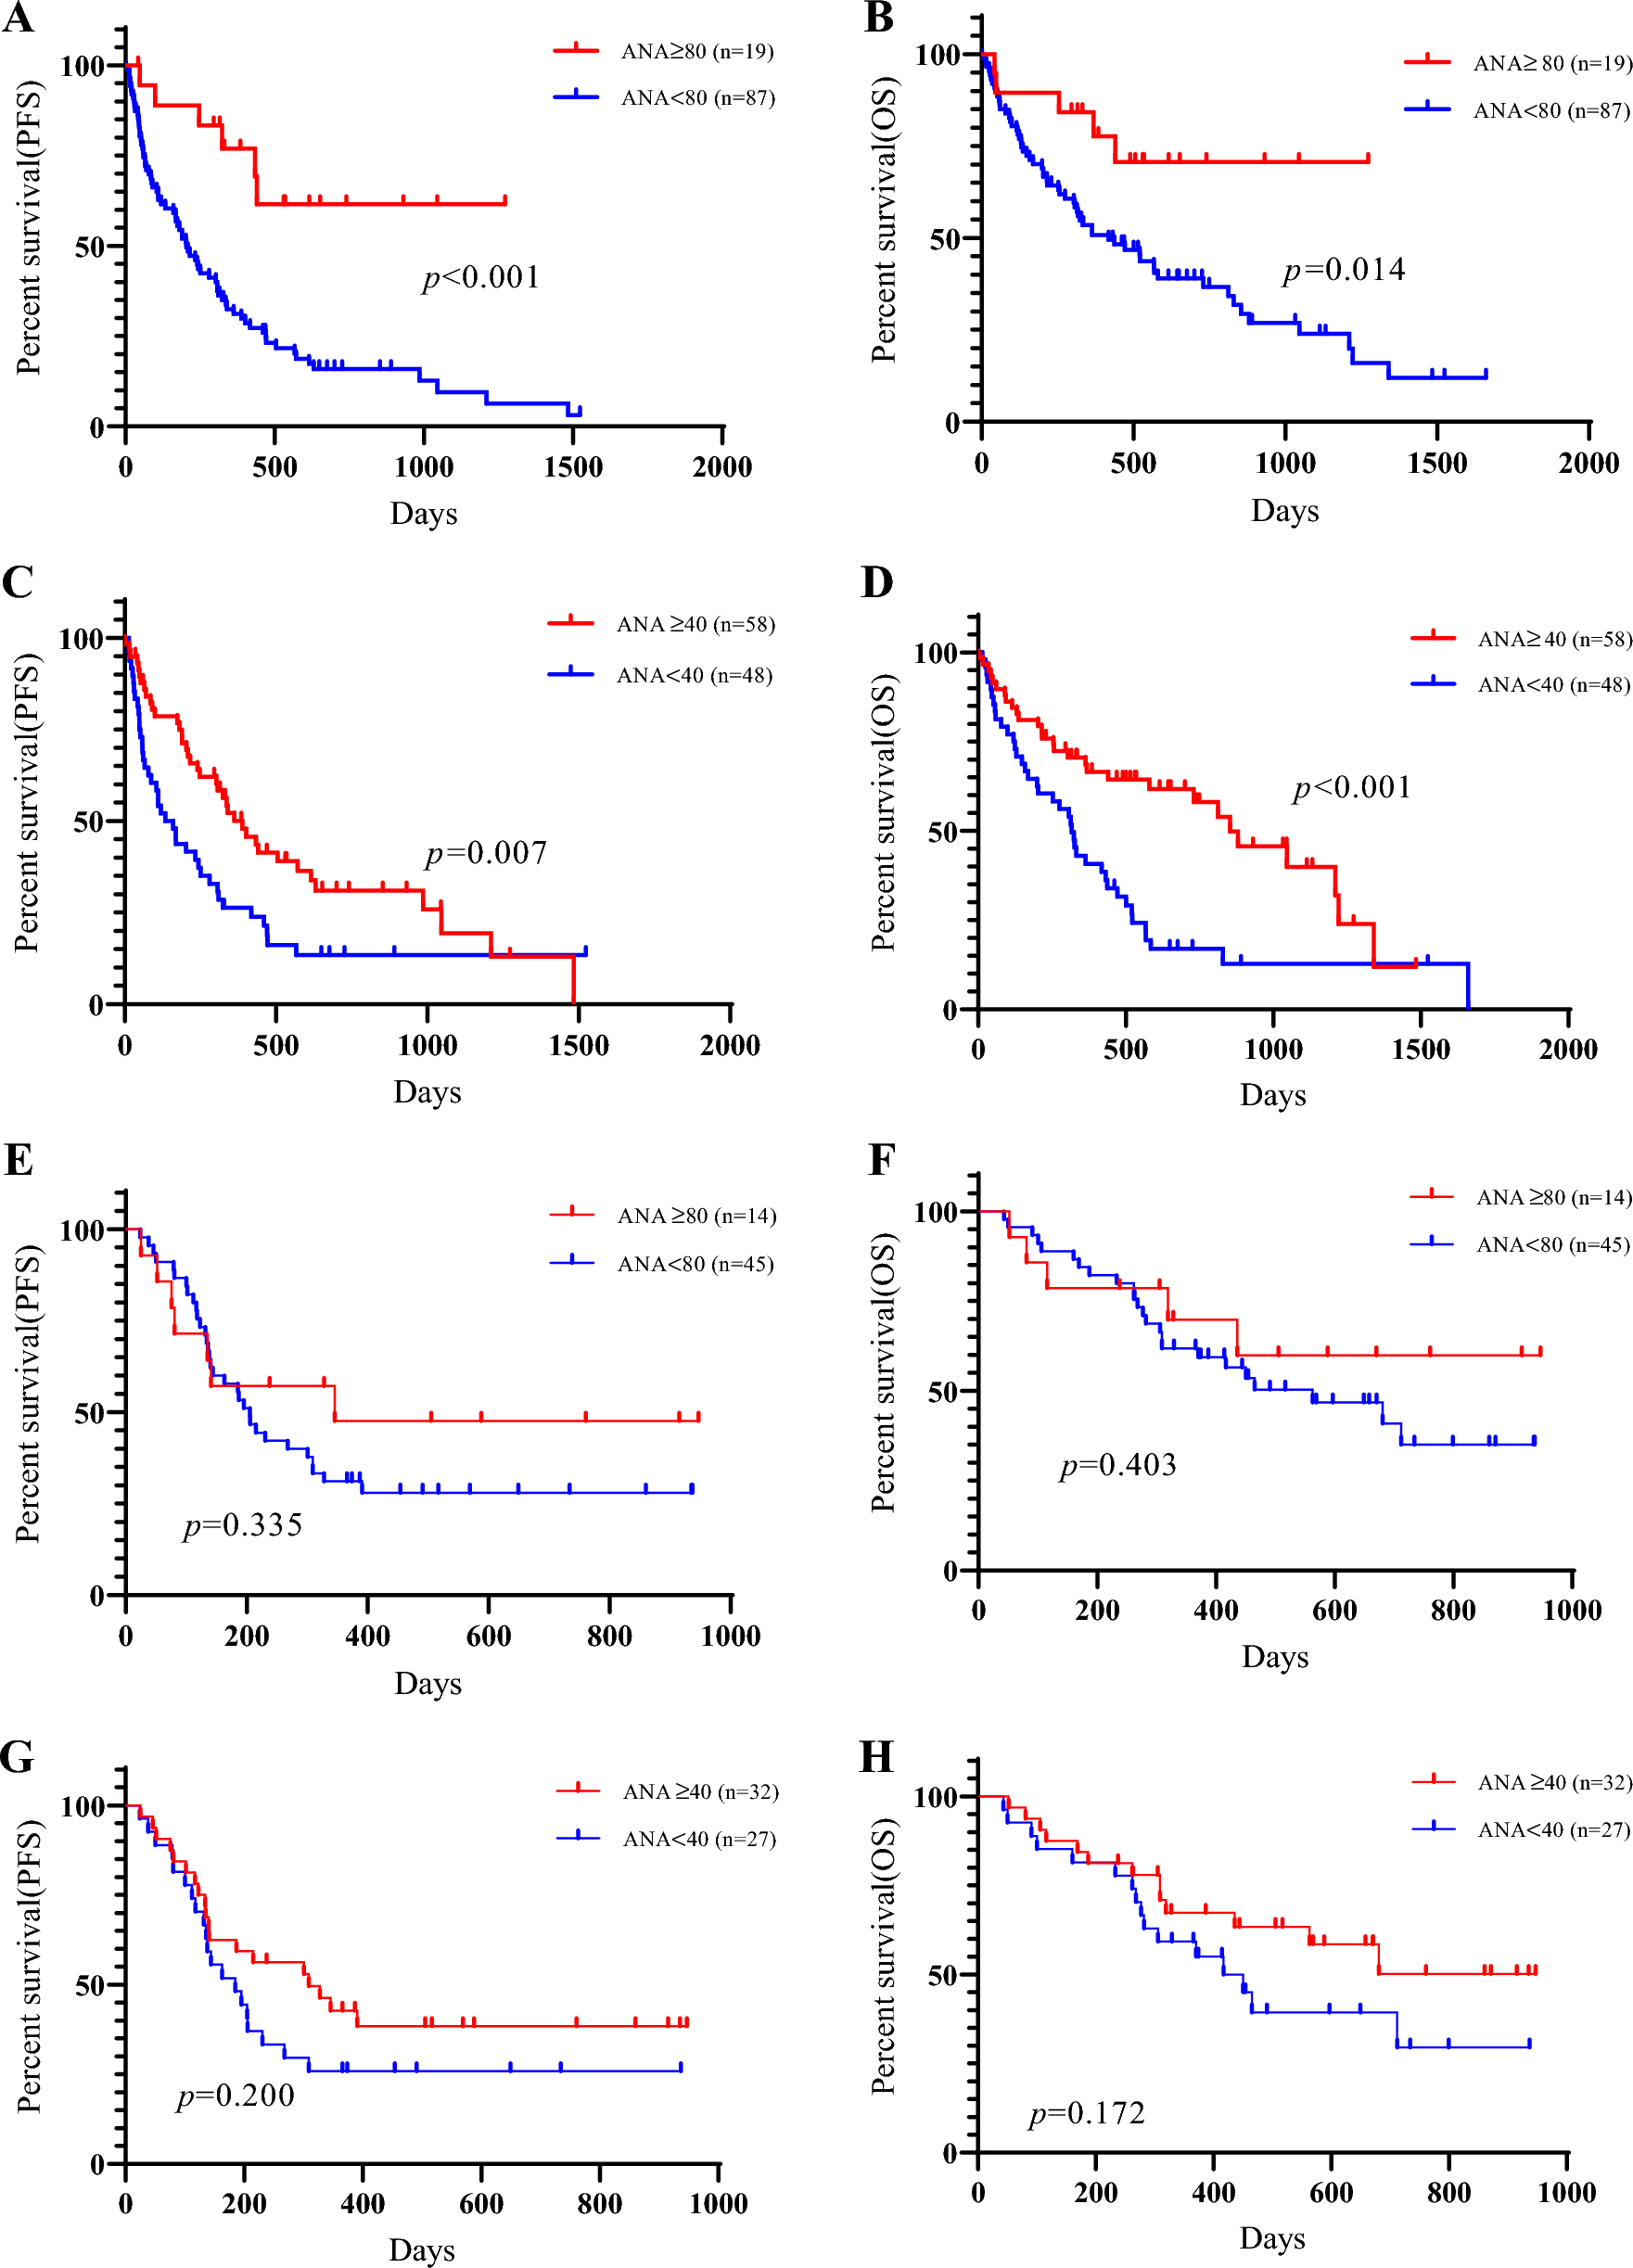 Clinical significance of antinuclear antibody as prognostic marker for first-line pembrolizumab in advanced non-small cell lung cancer